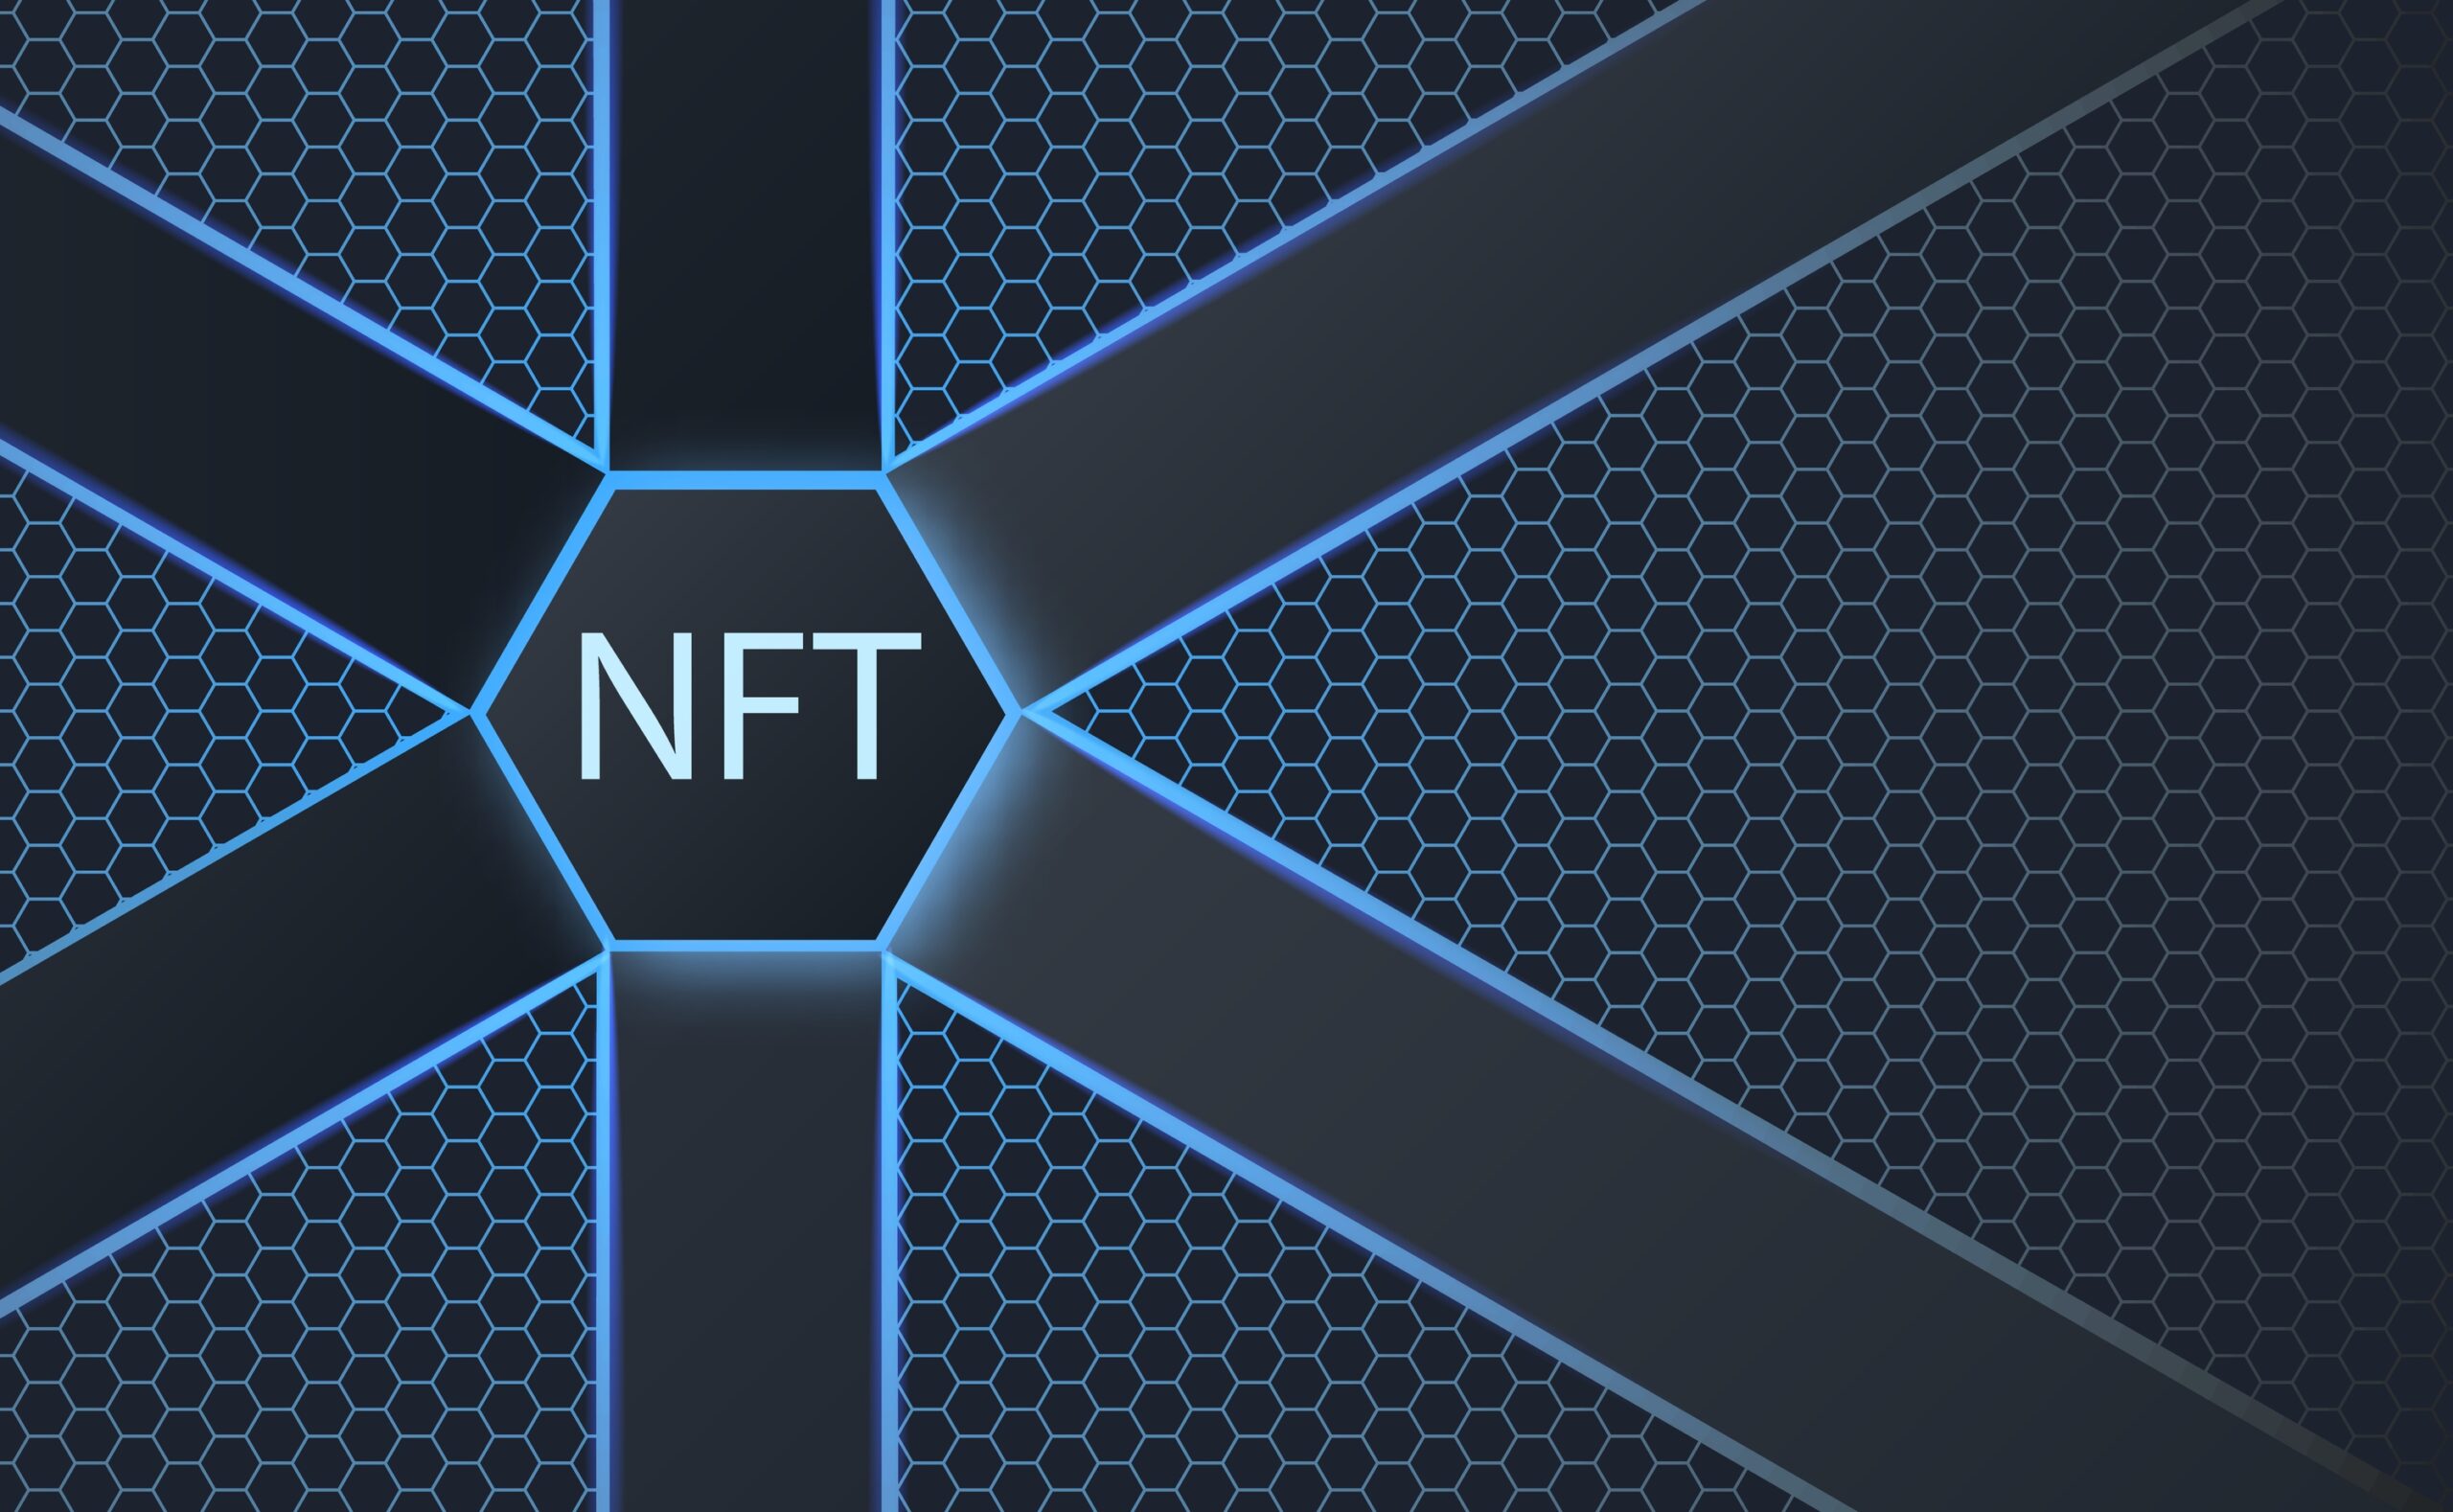 Non-Fungible Tokens (NFTs) Another Blockchain Bubble